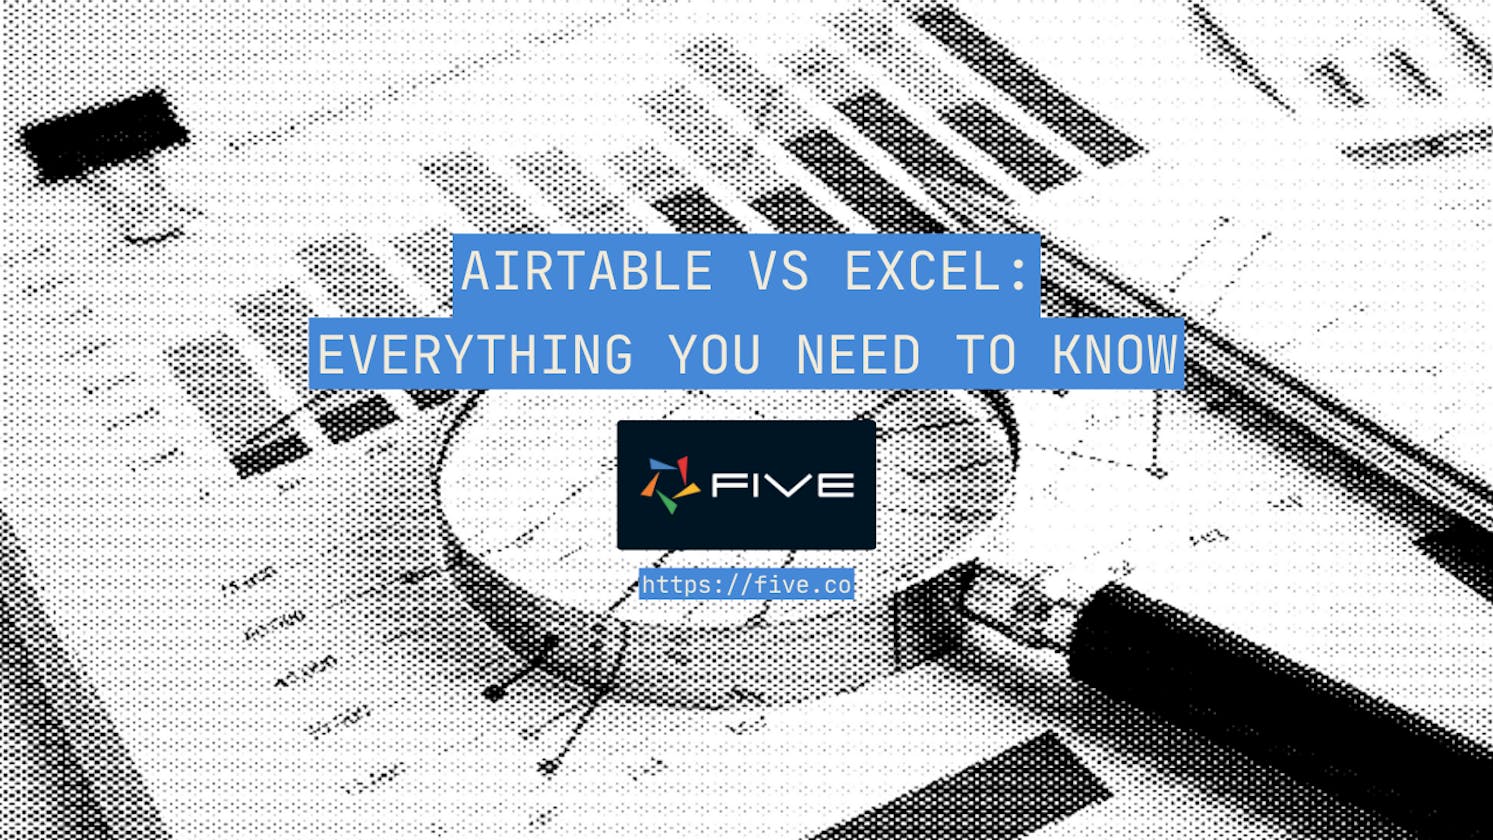 Airtable vs Excel: Everything You Need To Know